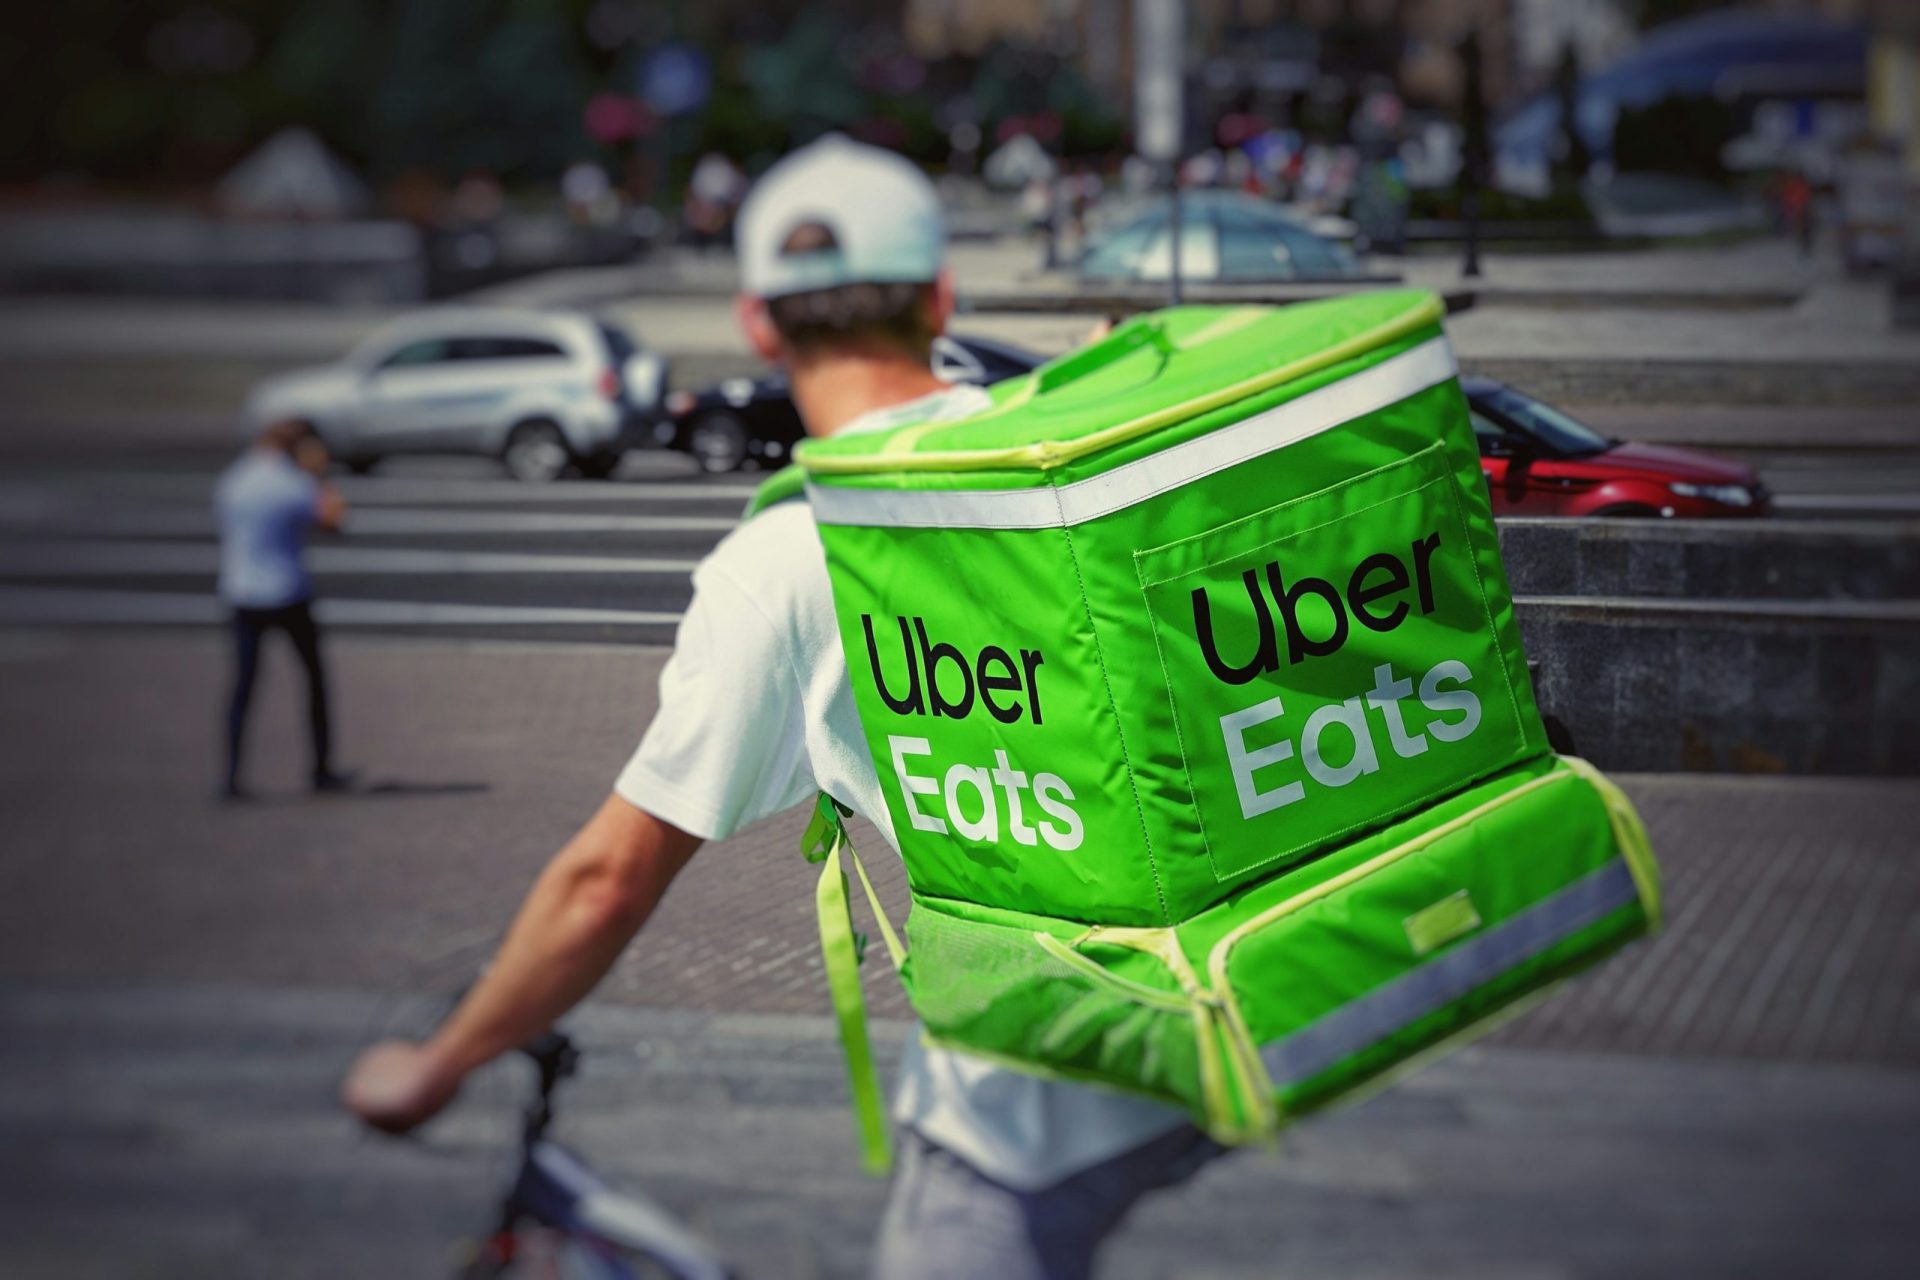 Food Delivery Logos: The Key to Brand Recognition and Customer Loyalty!